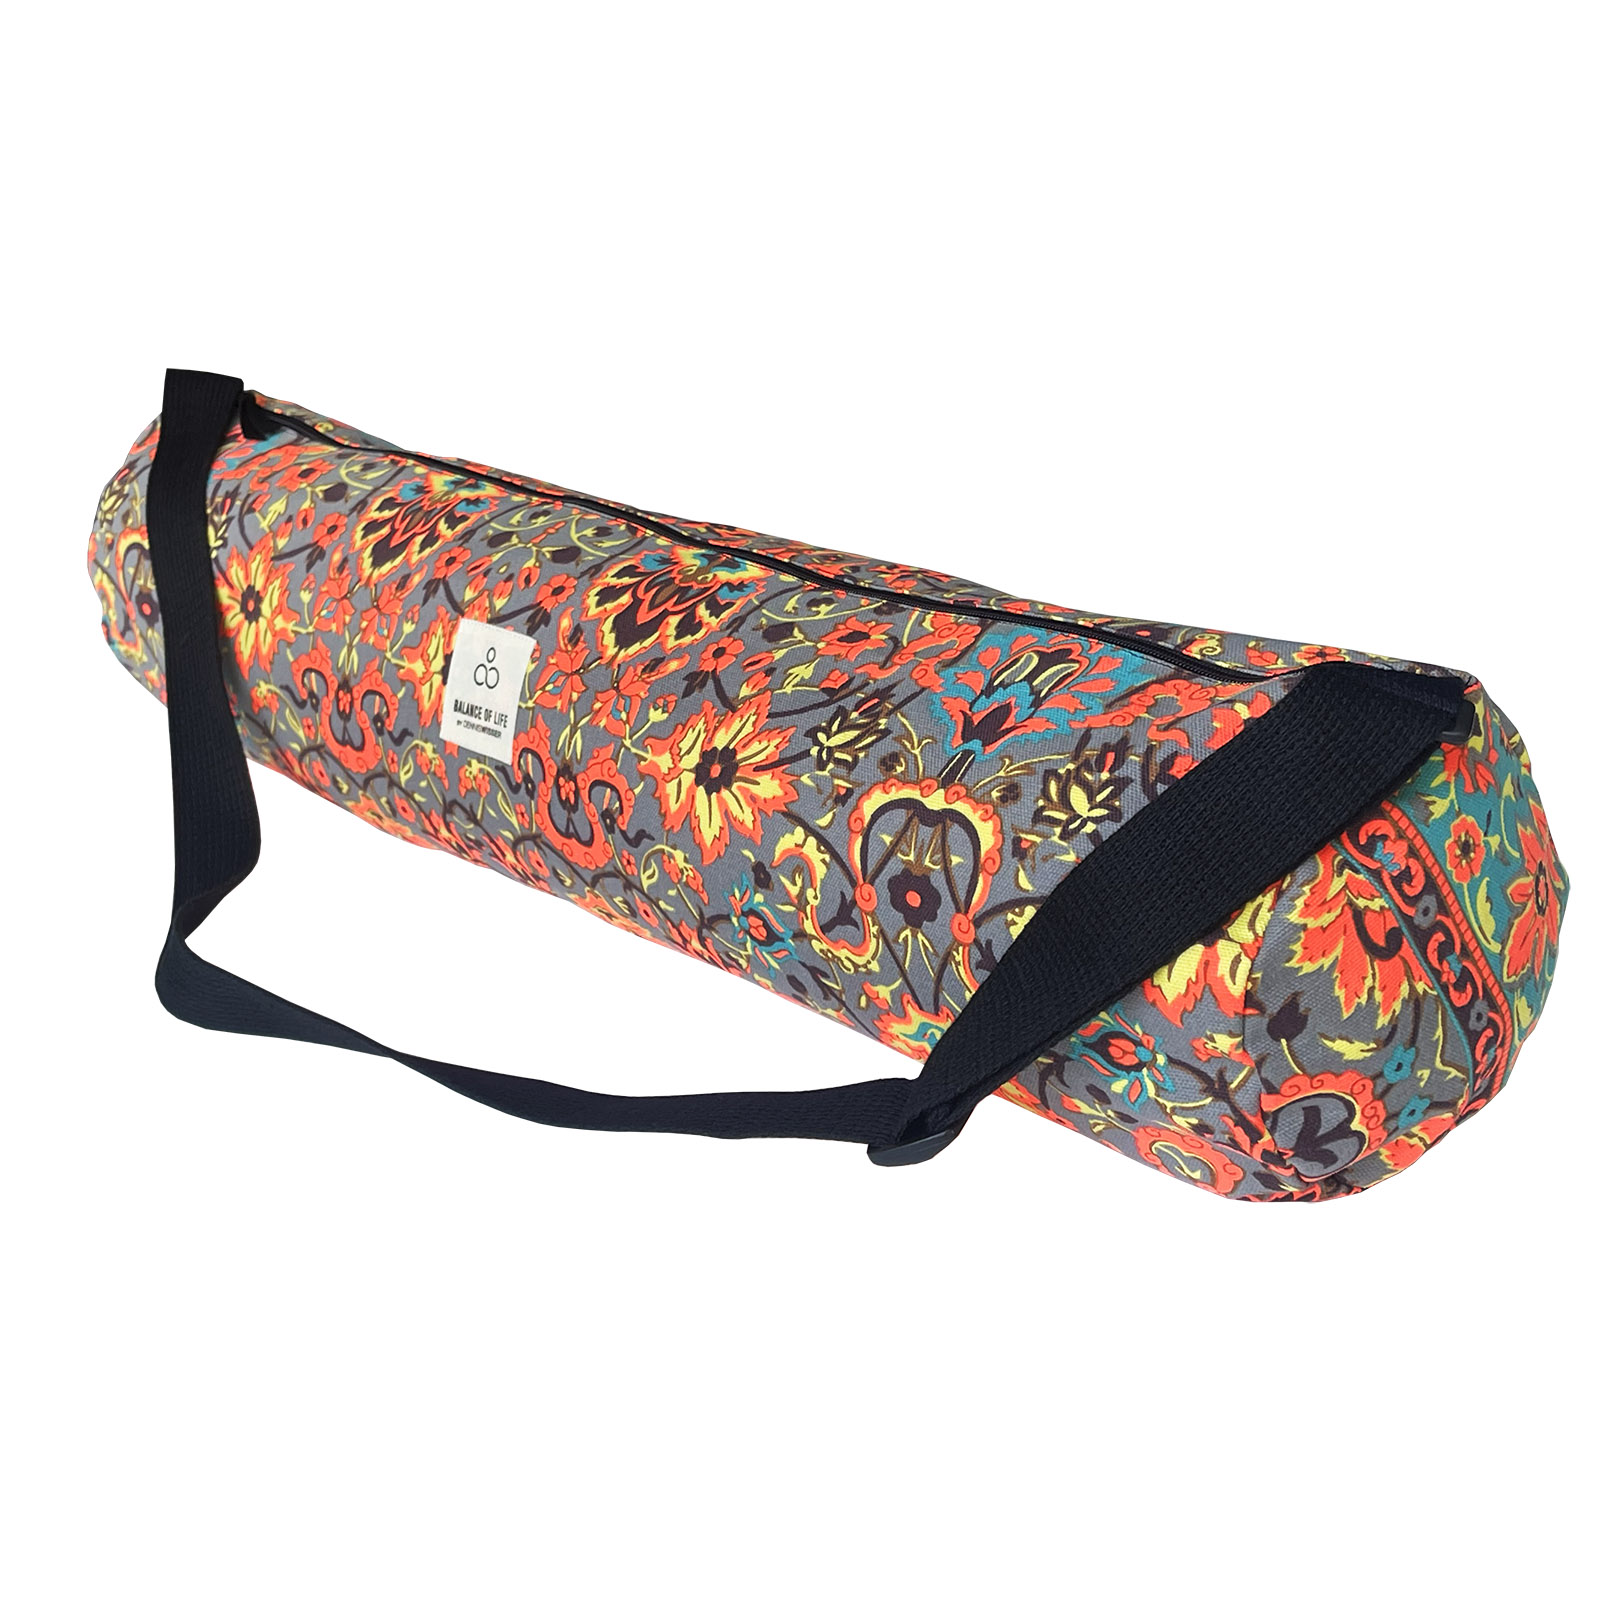 Details about   New Yoga Mat Bags Hippie Indian Cotton Mat Carrier Bag with Shoulder Strap Throw 